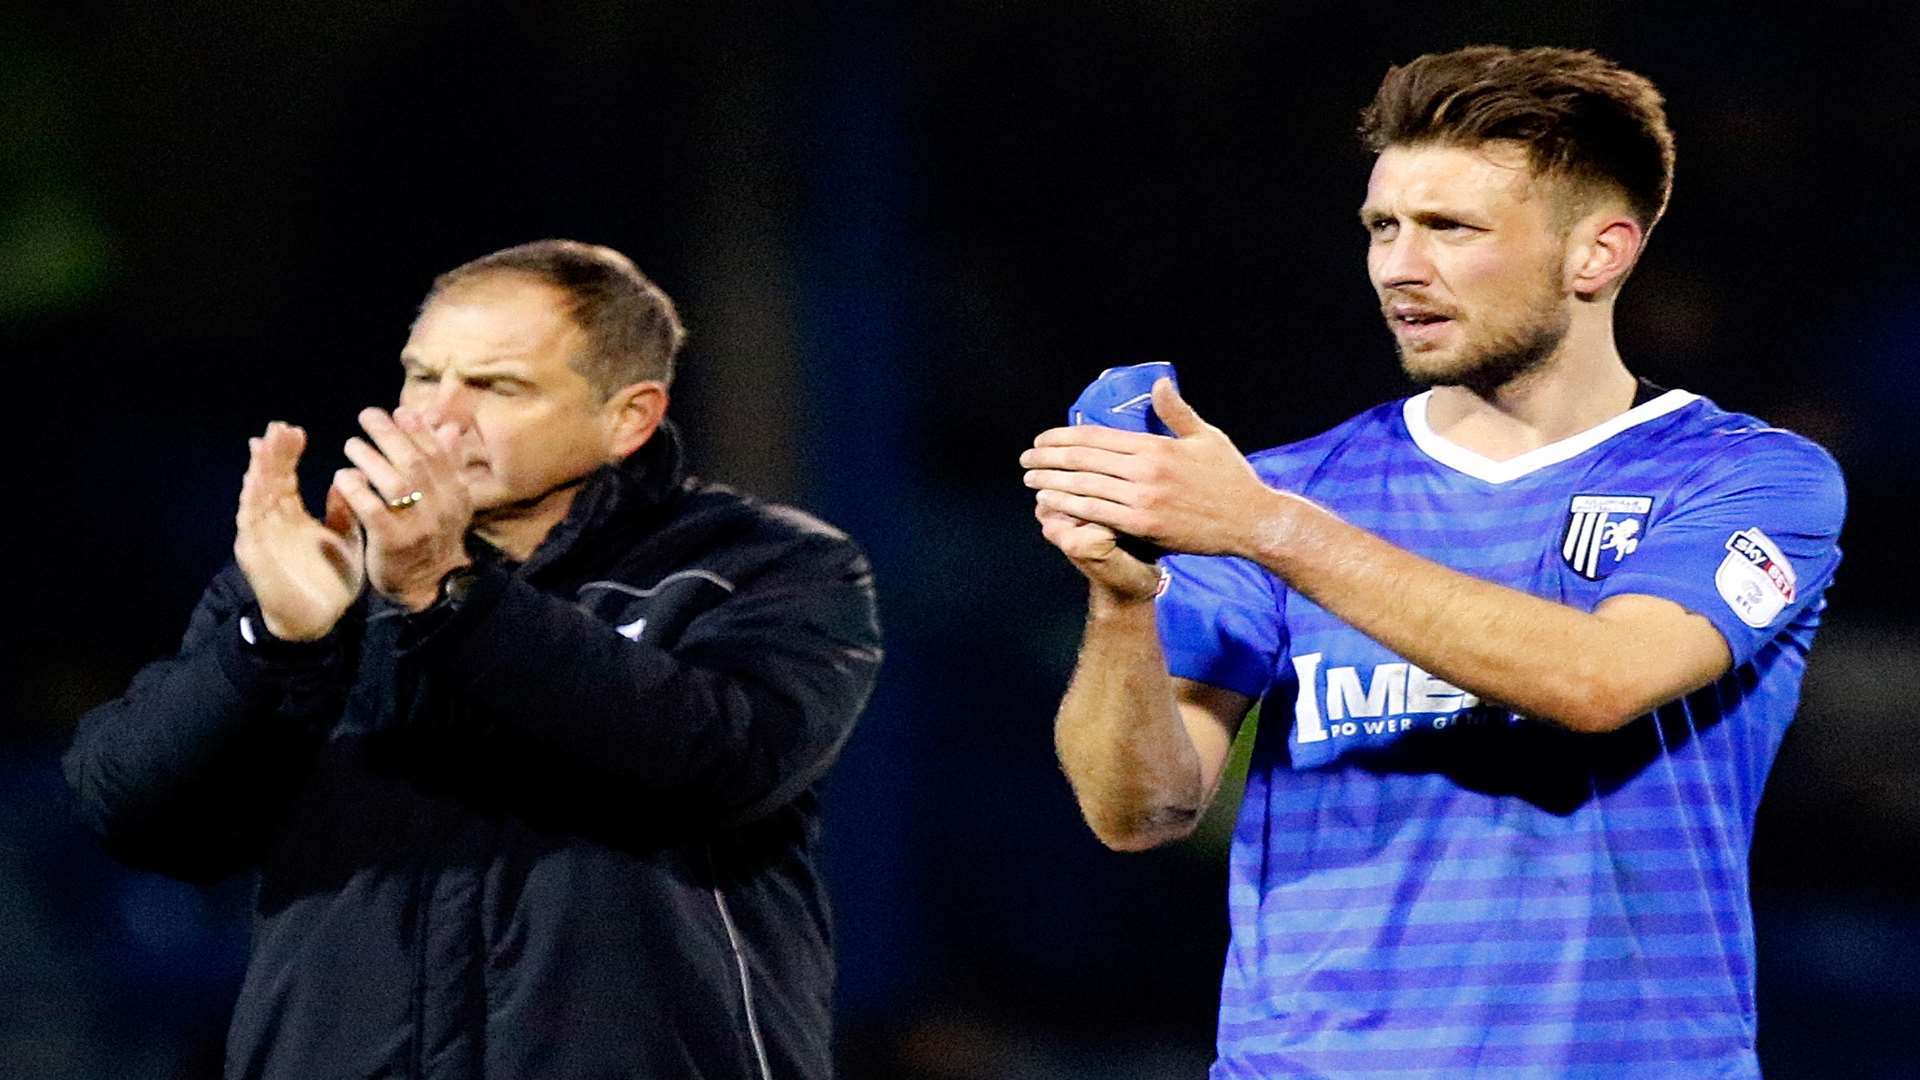 Boss Steve Lovell and defender Luke O'Neill thank the Gills fans for their support on Saturday Picture: Andy Jones